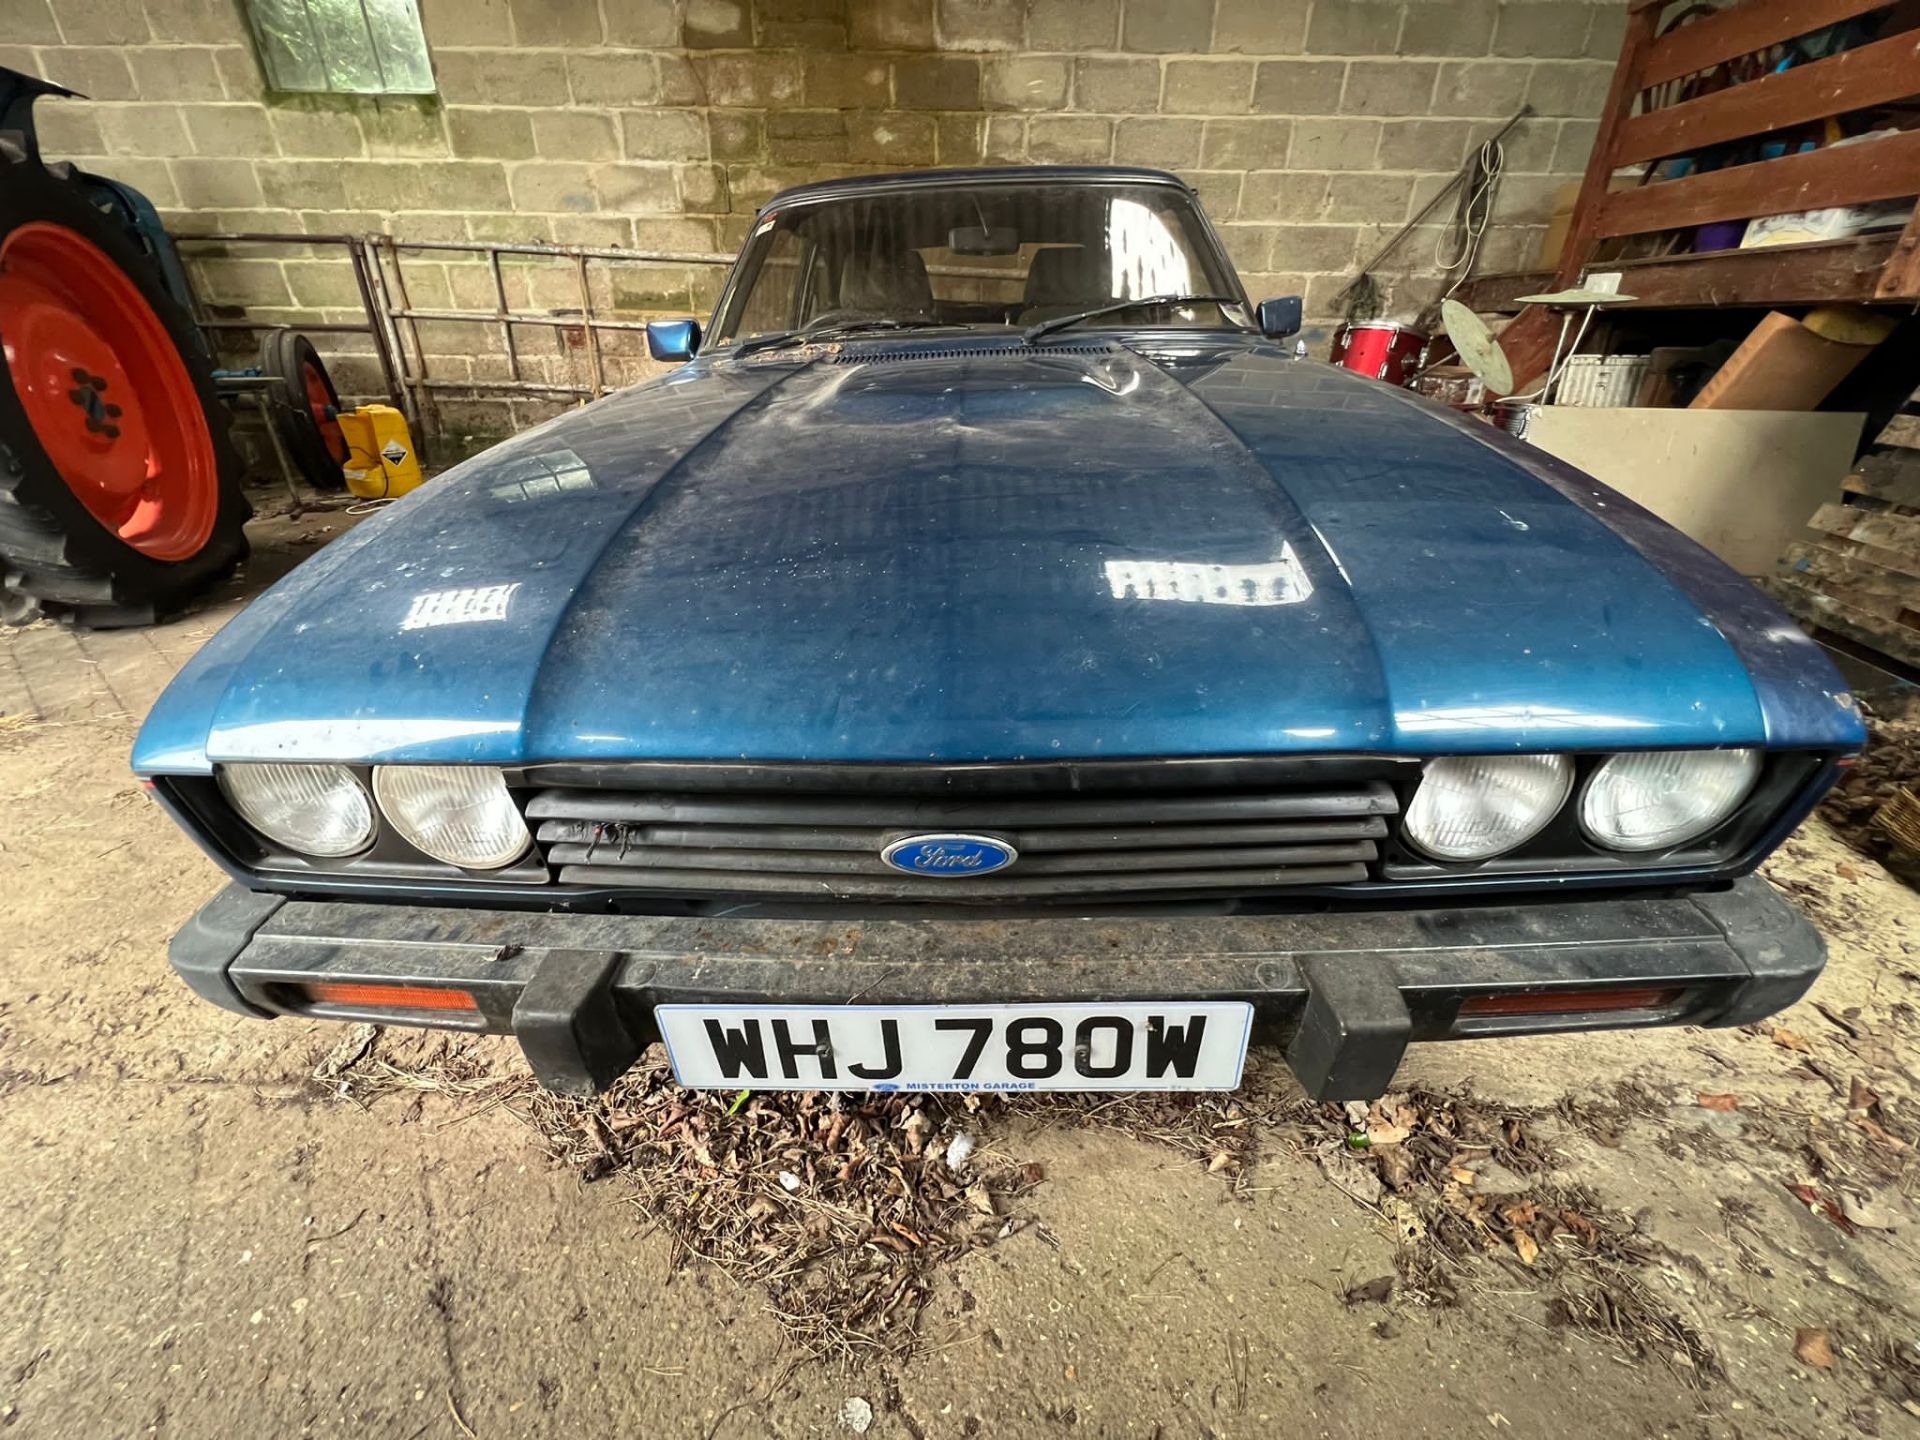 Ford Capri MkIII 2.8 Injection 1981 - Barn Find - Image 33 of 44